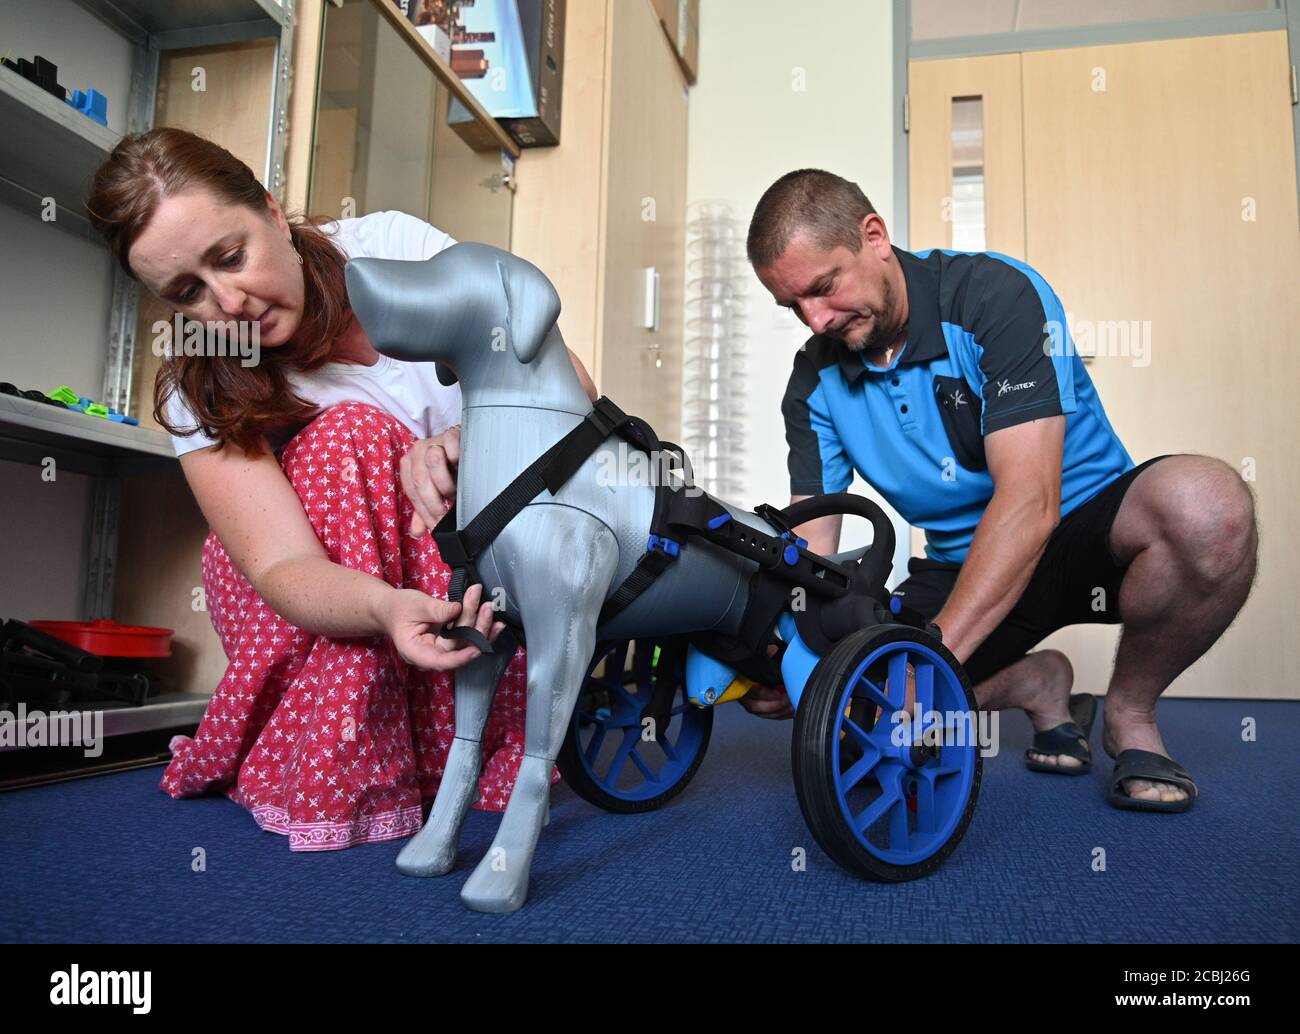 Brno, Czech Republic. 11th Aug, 2020. AnyOneGo, Czech company from Brno, manufactures prosthetics and wheelchairs for animals, most parts prints on 3D printers. On the photo L-R Jana Varnerova and Martin Schenk show a wheelchair for a dog, on August 11, 2020, in Brno, Czech Republic. (CTK photo/Igor Zehl) Stock Photo